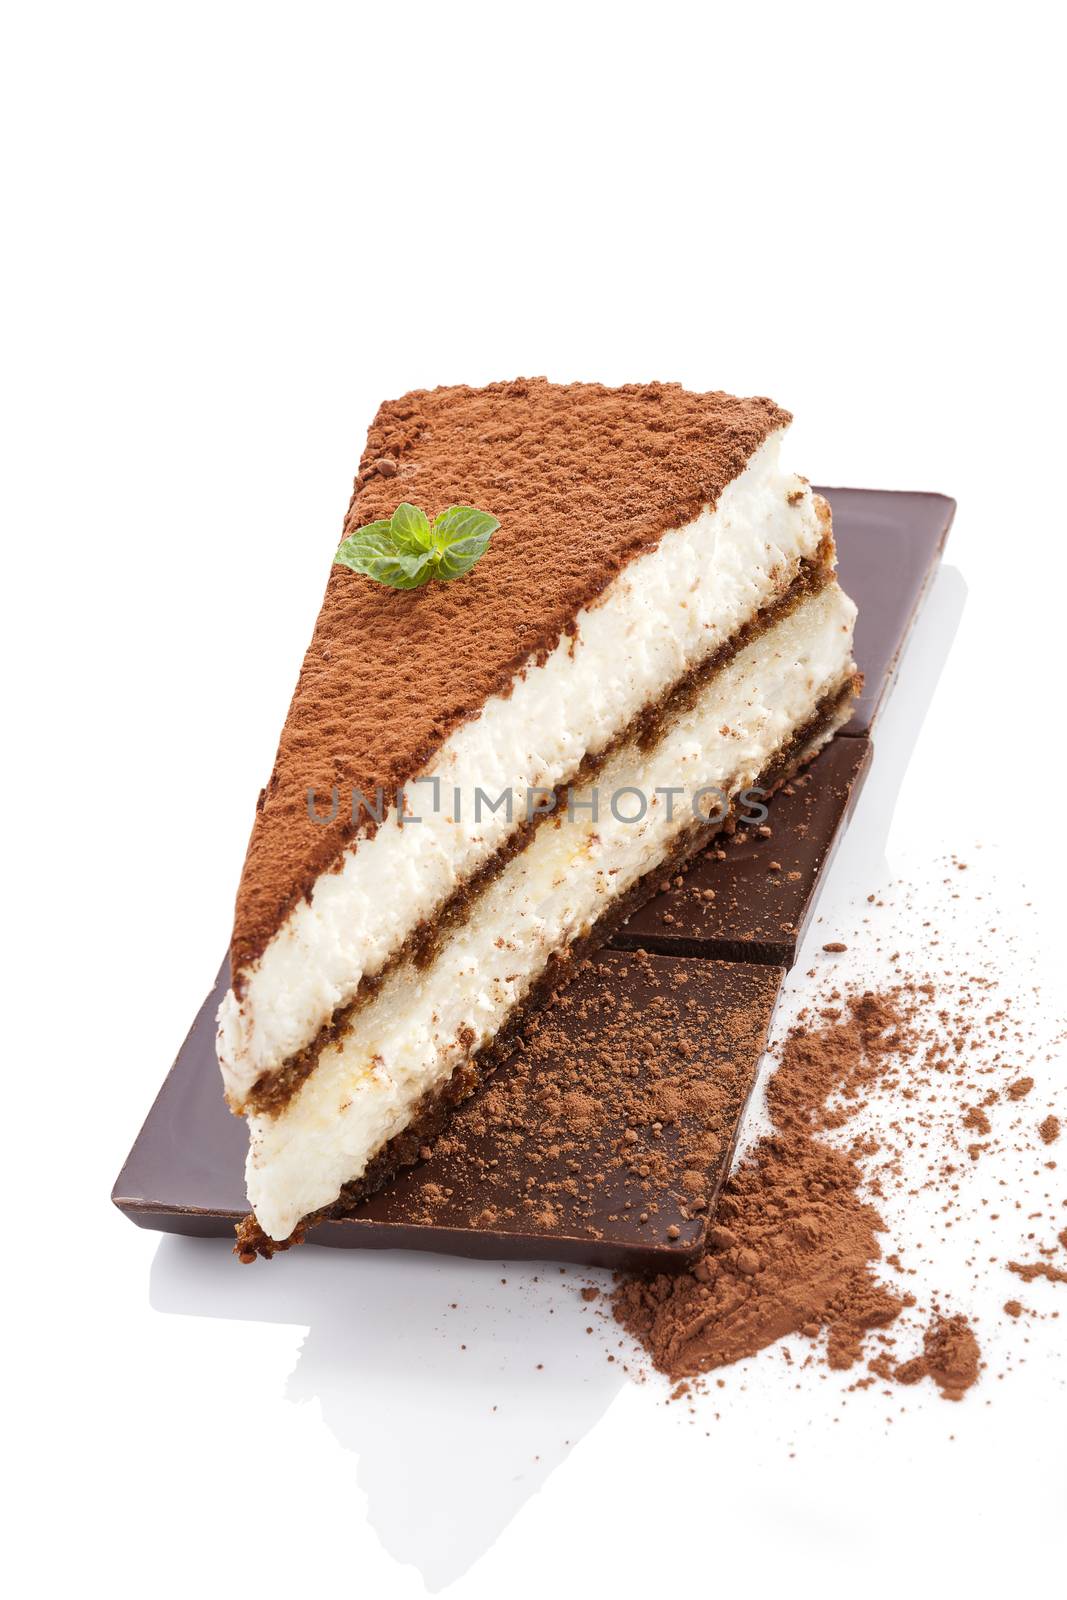 Delicious tiramisu dessert on chocolate bar with cocoa powder isolated on white background. Traditional sweet dessert.